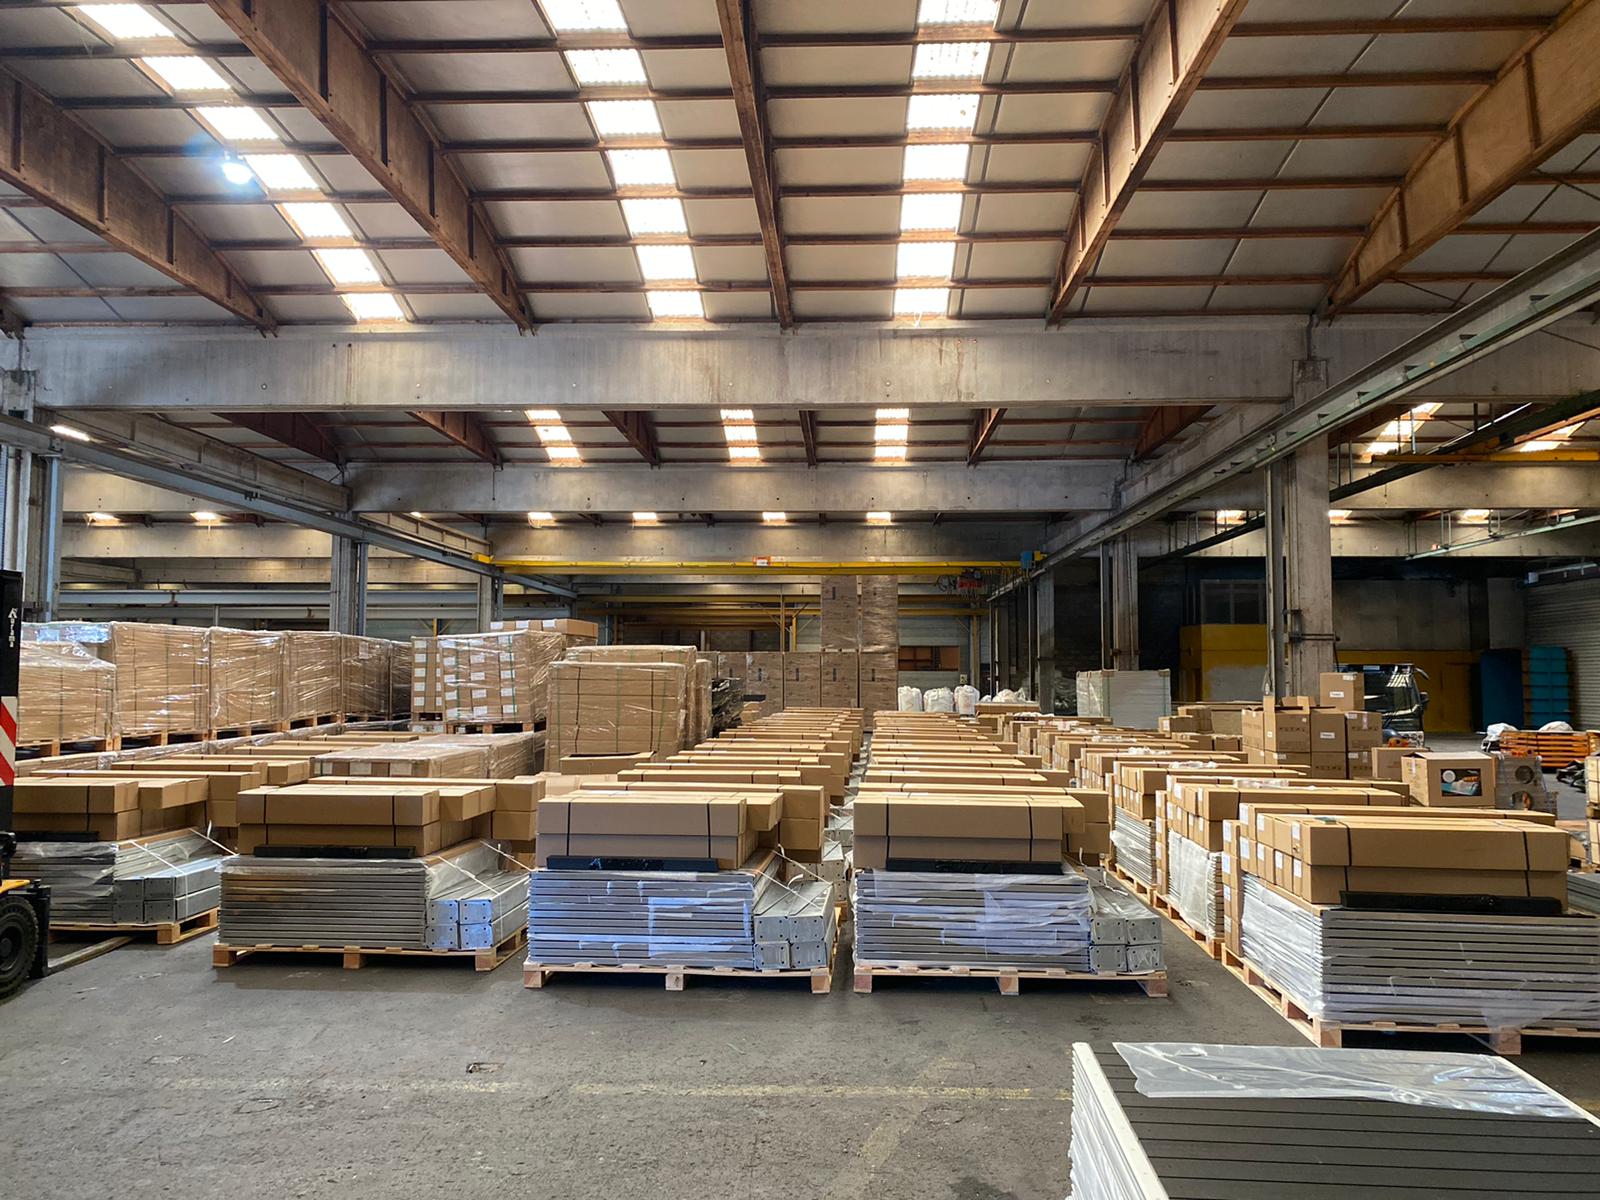 Warehouse with pallets of pool components